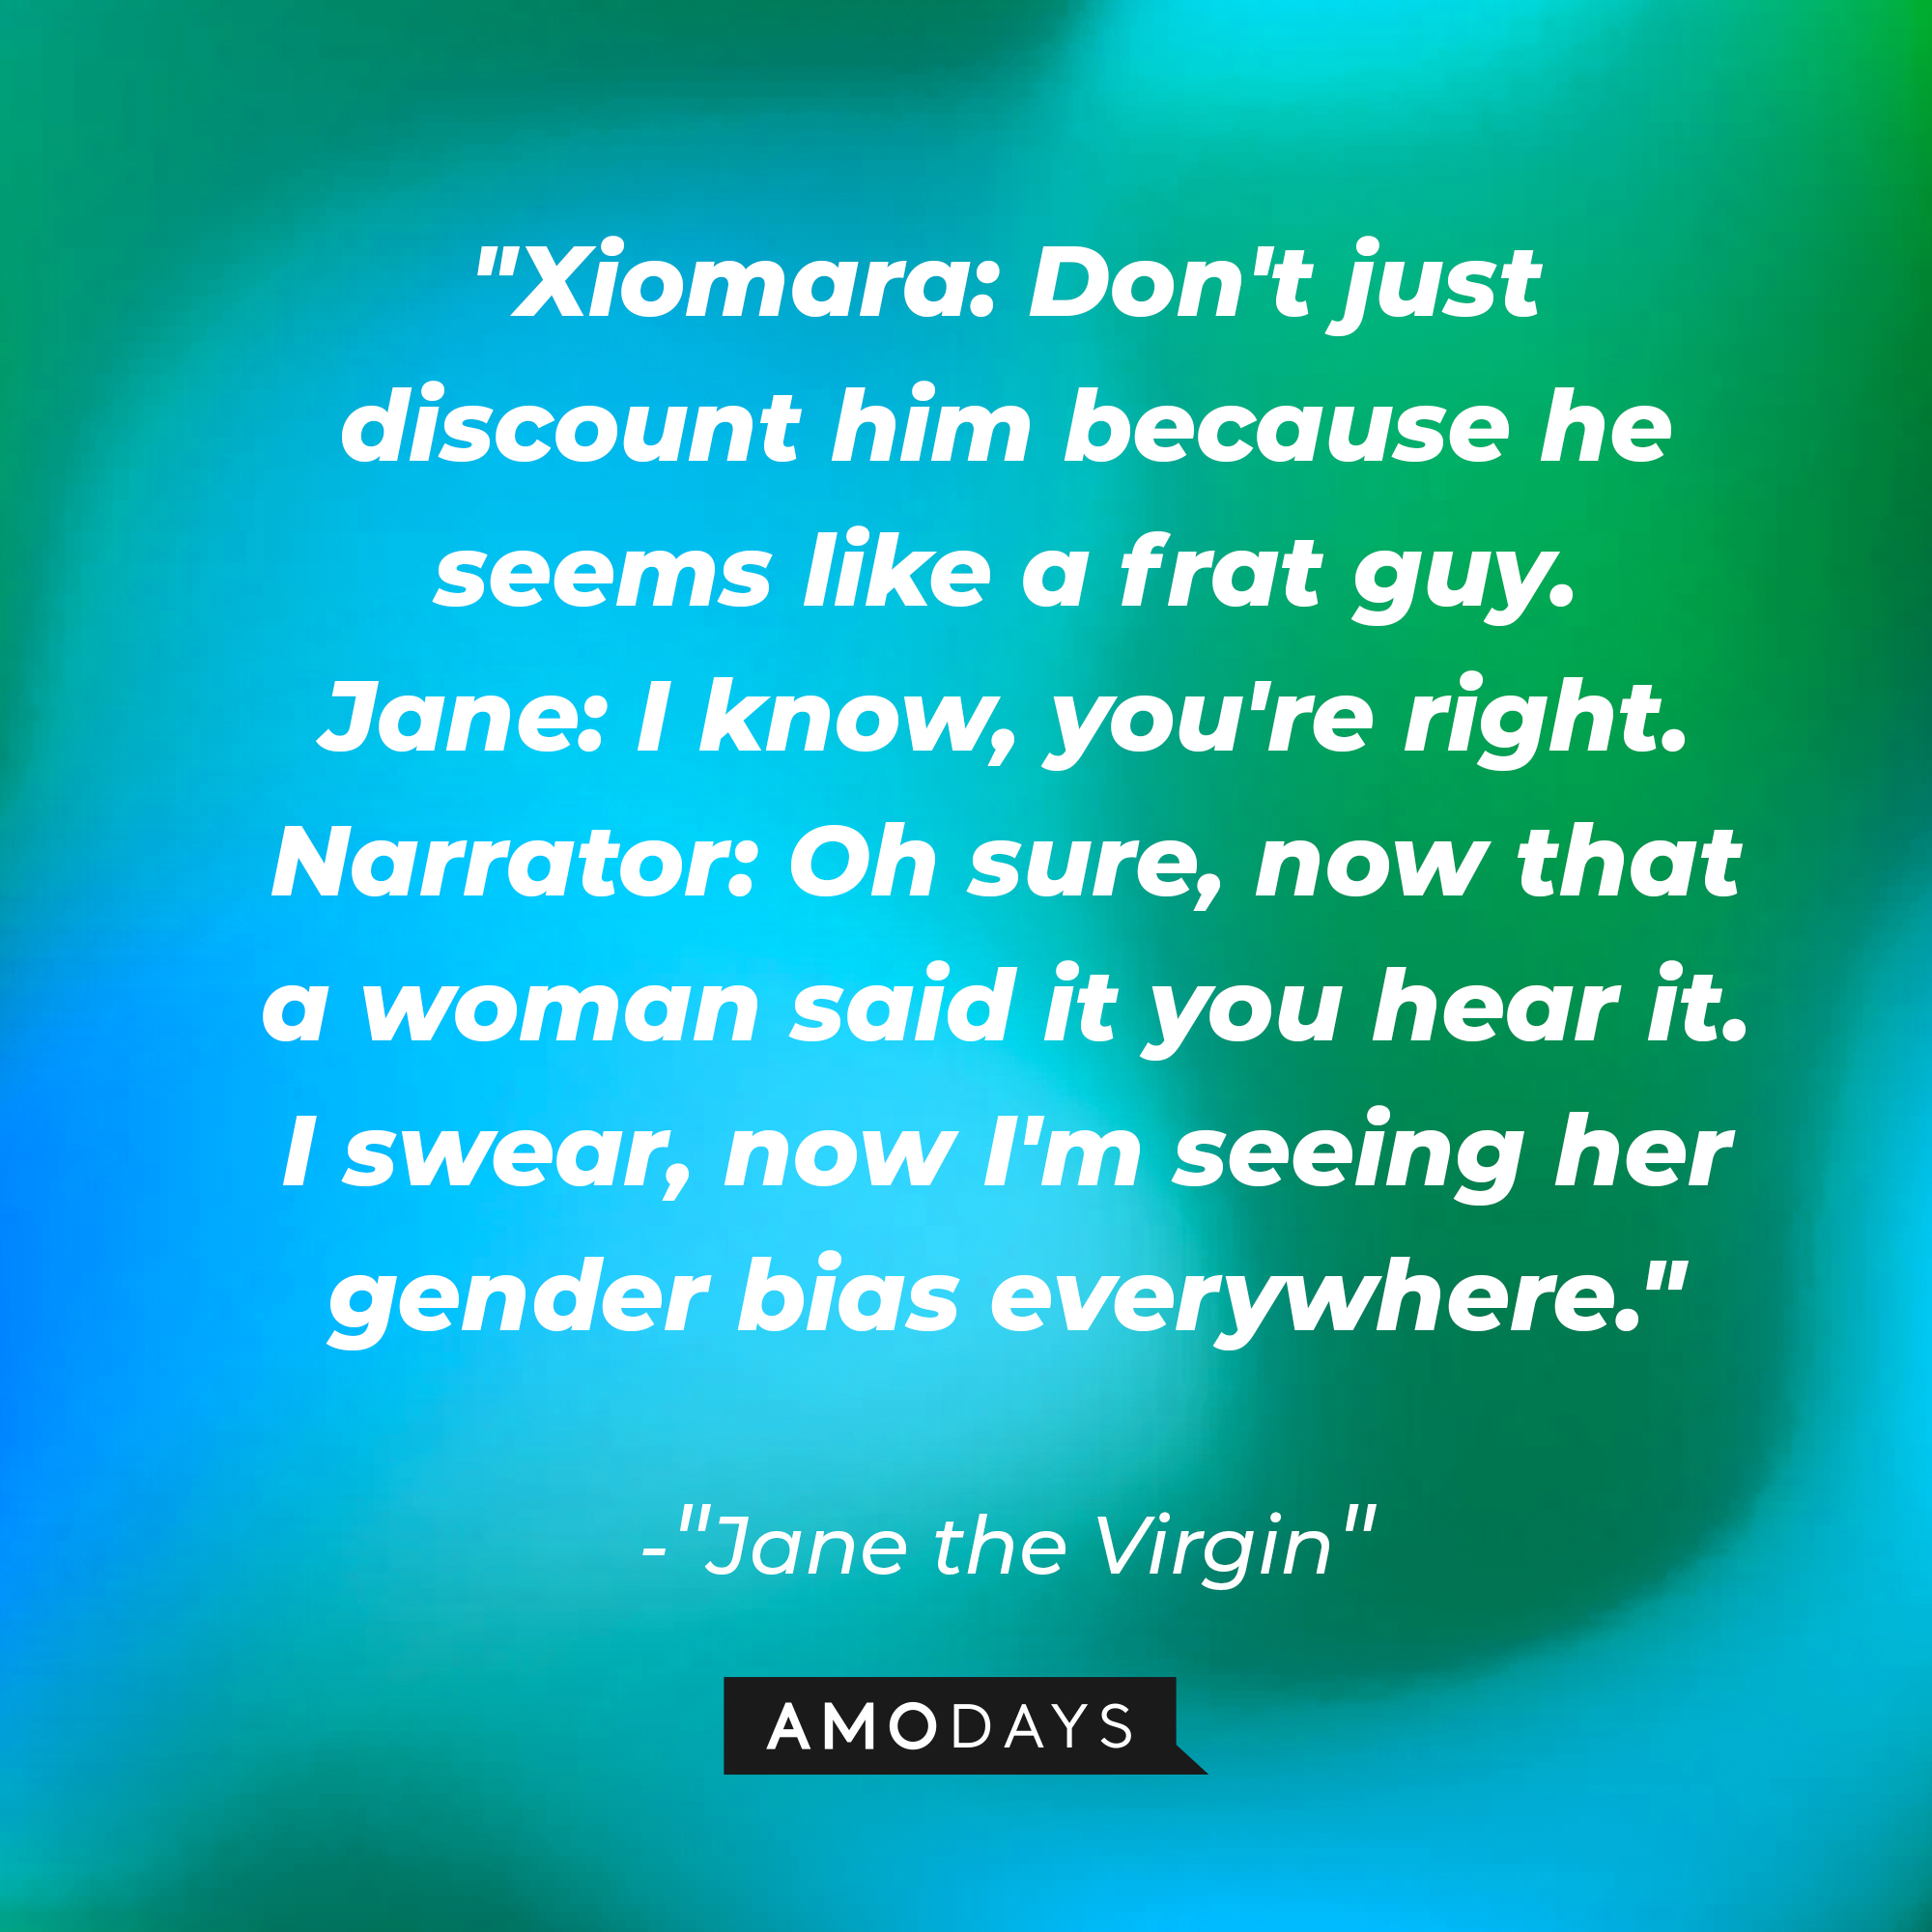 Jane Villanueva's dialogue in "Jane the Virgin:" "Xiomara: Don't just discount him because he seems like a frat guy; Jane: I know, you're right; Narrator: Oh sure, now that a woman said it you hear it. I swear, now I'm seeing her gender bias everywhere." | Source: Amodays